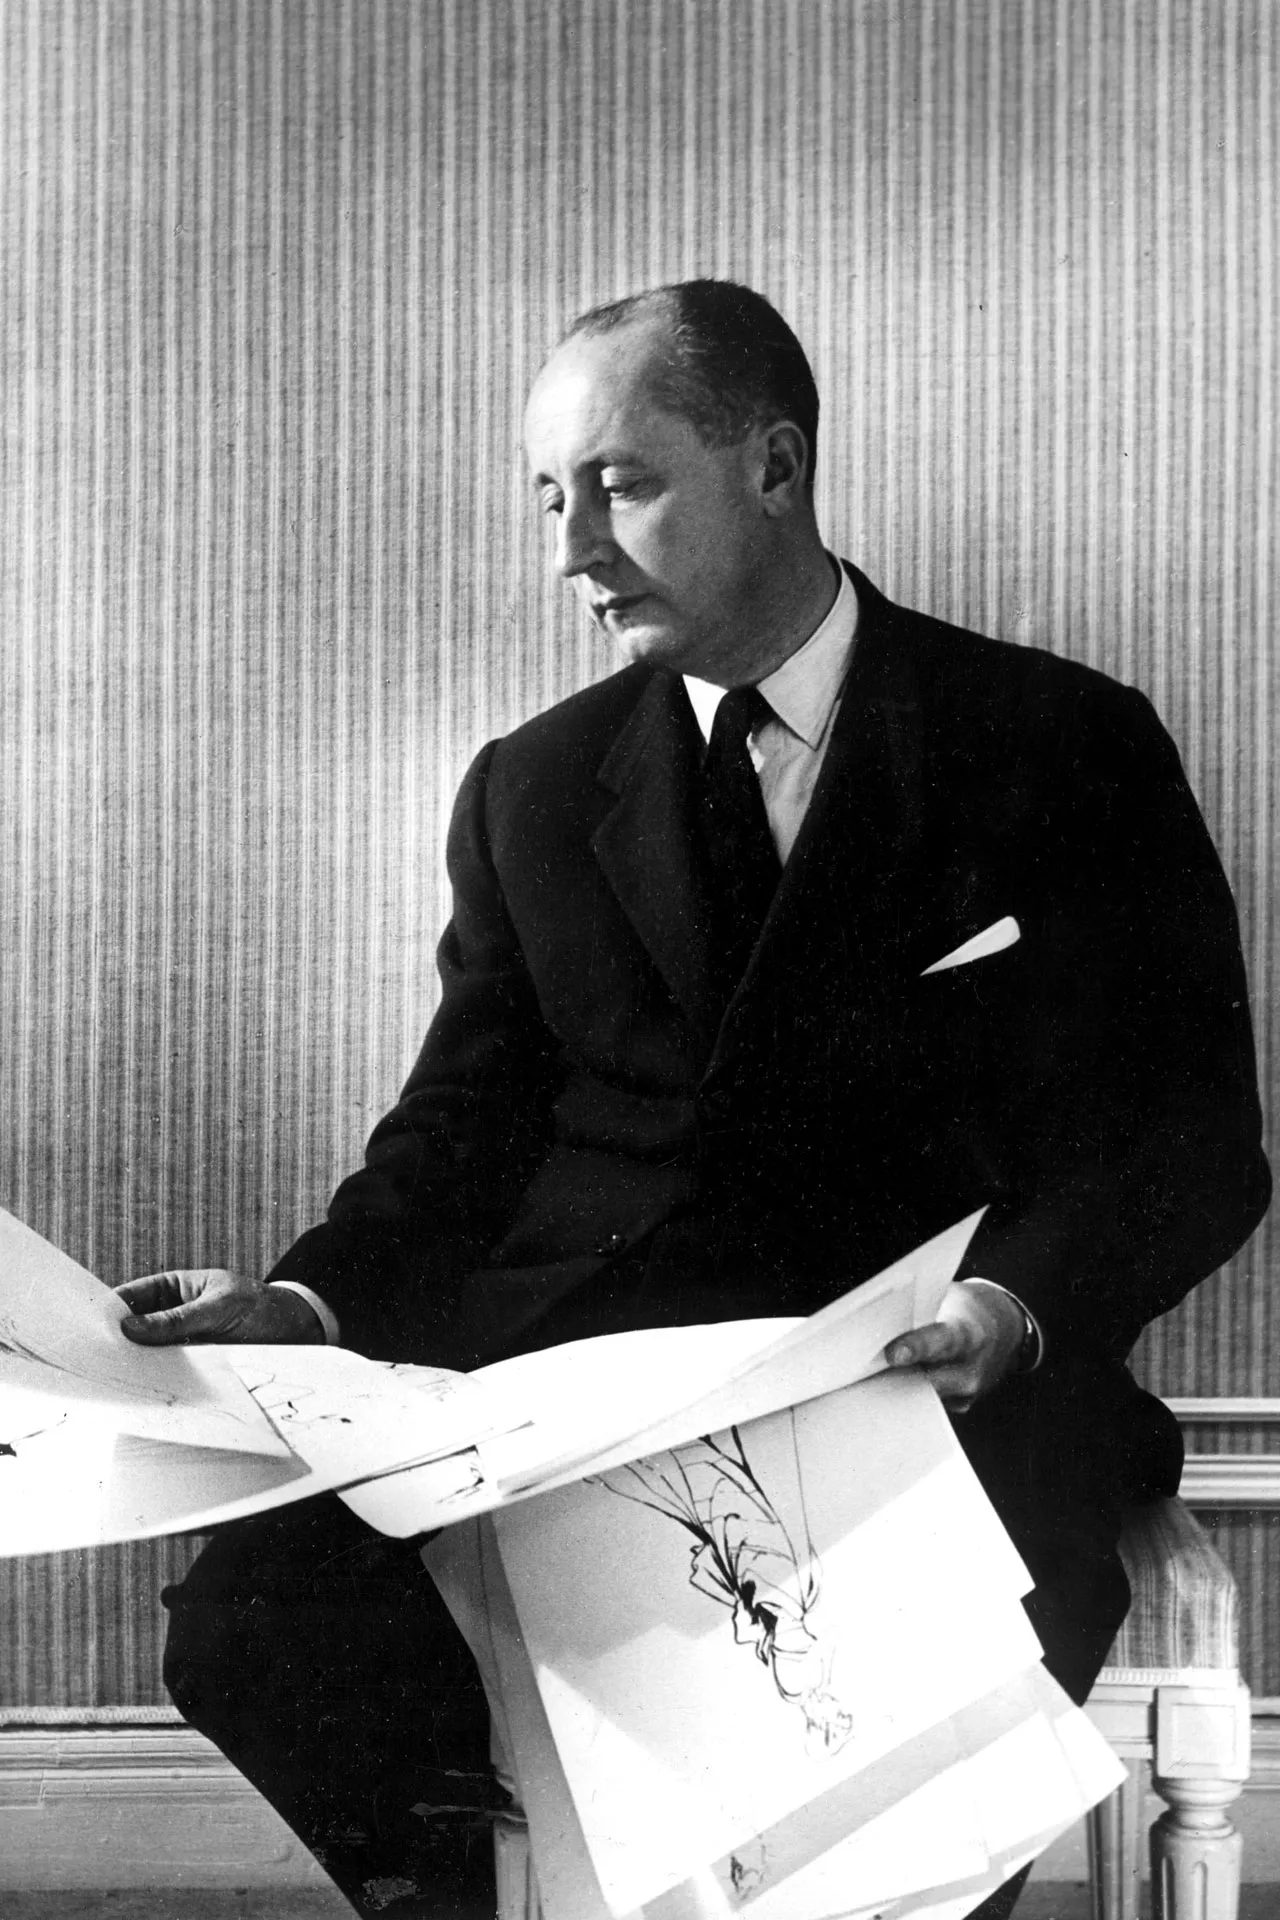 Christian Dior's early life